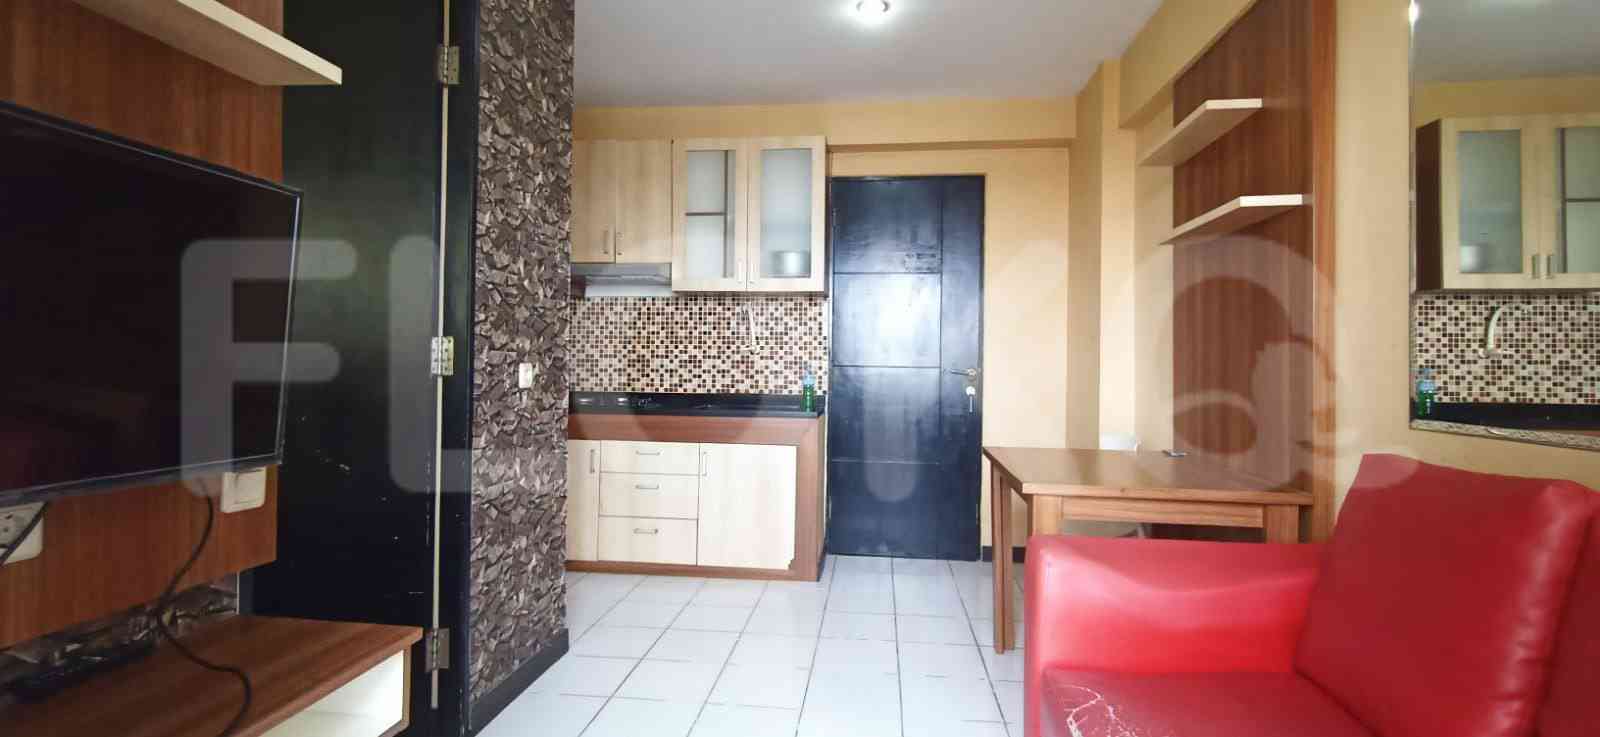 1 Bedroom on 15th Floor for Rent in Sentra Timur Residence - fcabec 1